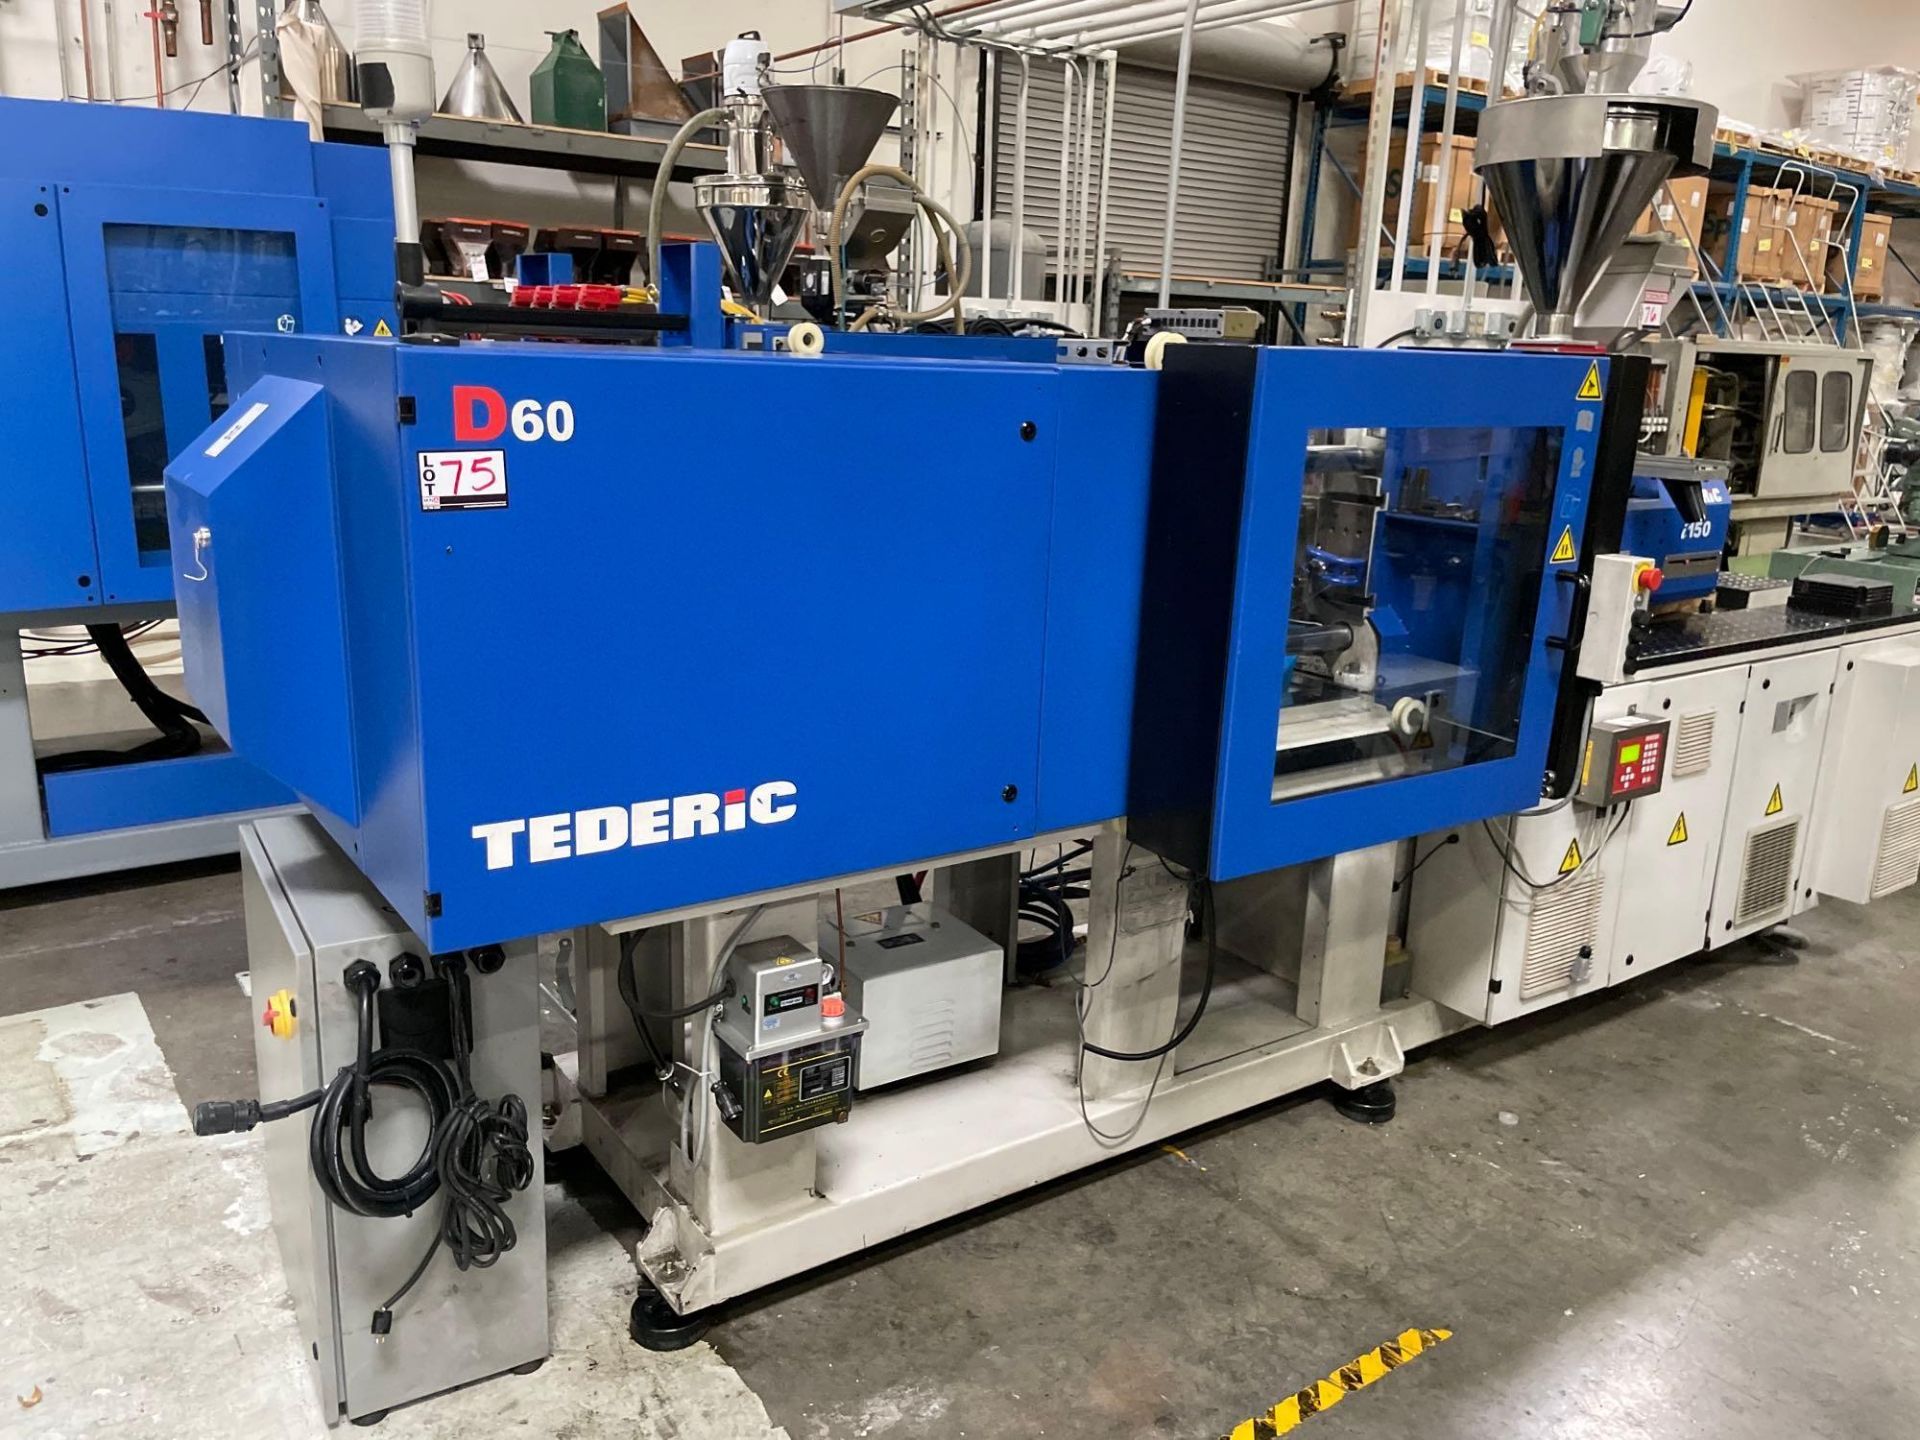 66 Ton Tederic D60/150 Plastic Injection Molder, Gefran GF Vedo 104 Control, s/n D1008-0114, New - Image 3 of 23